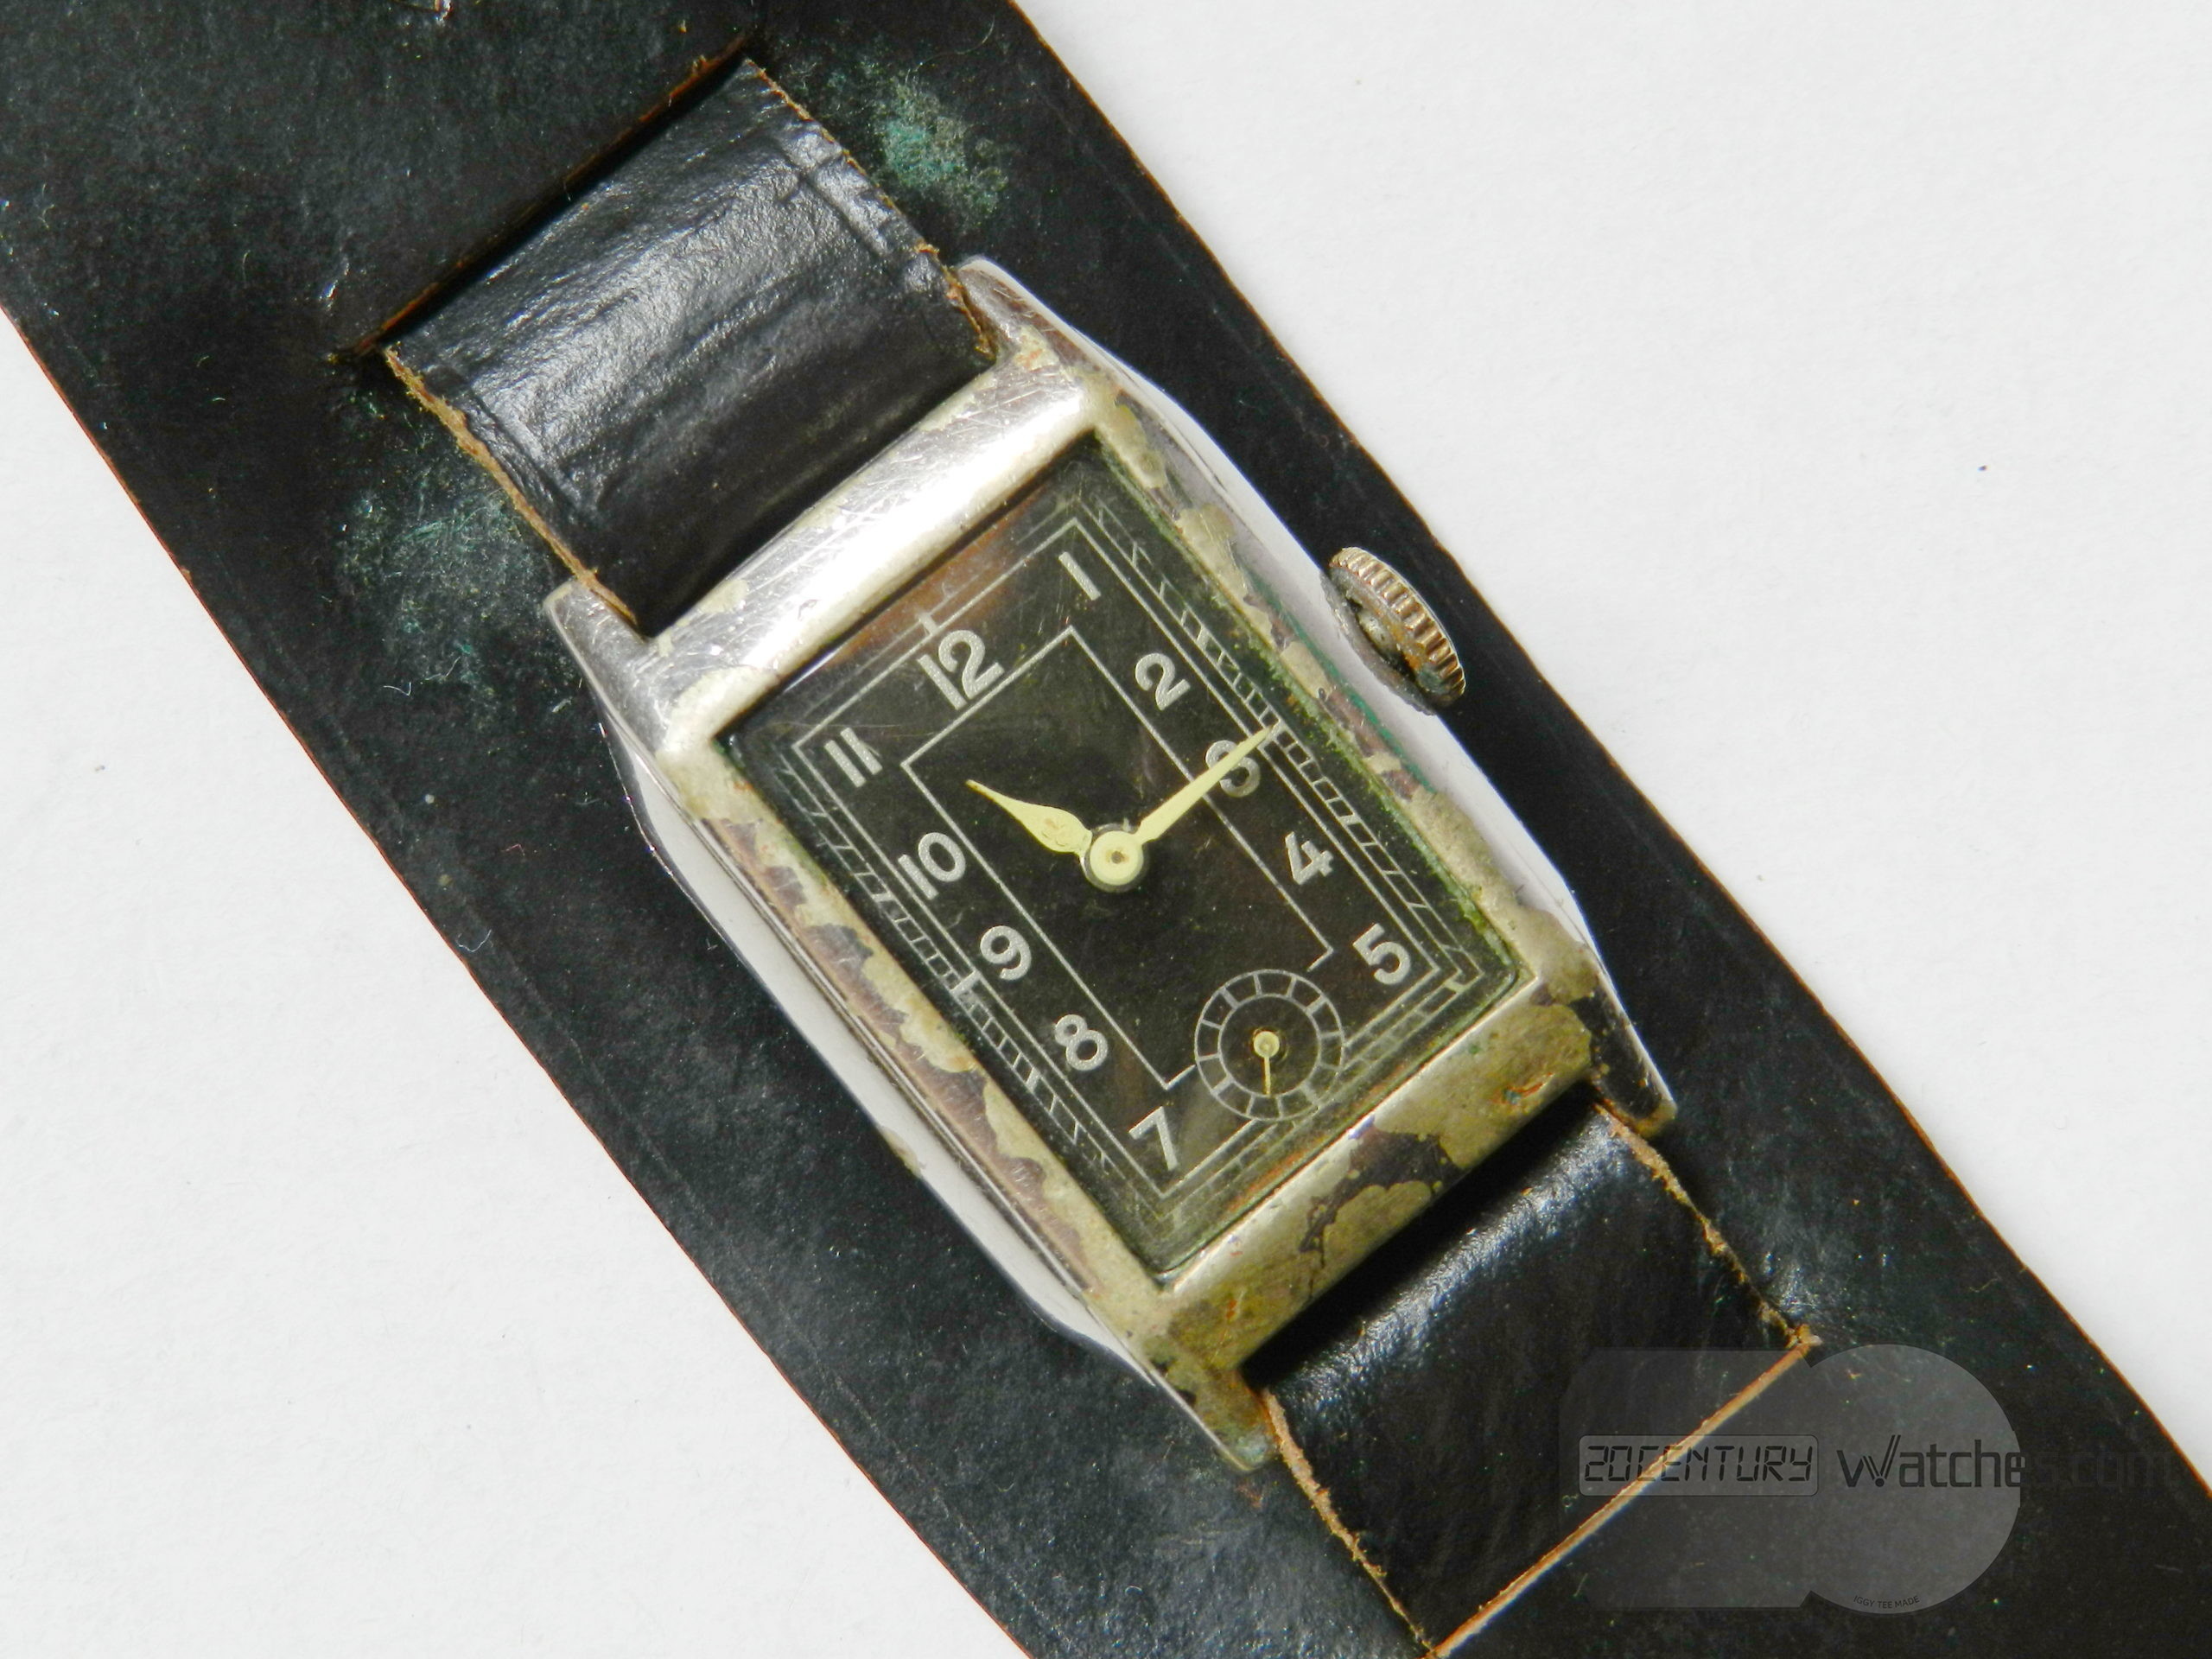 Art deco watch from 1940